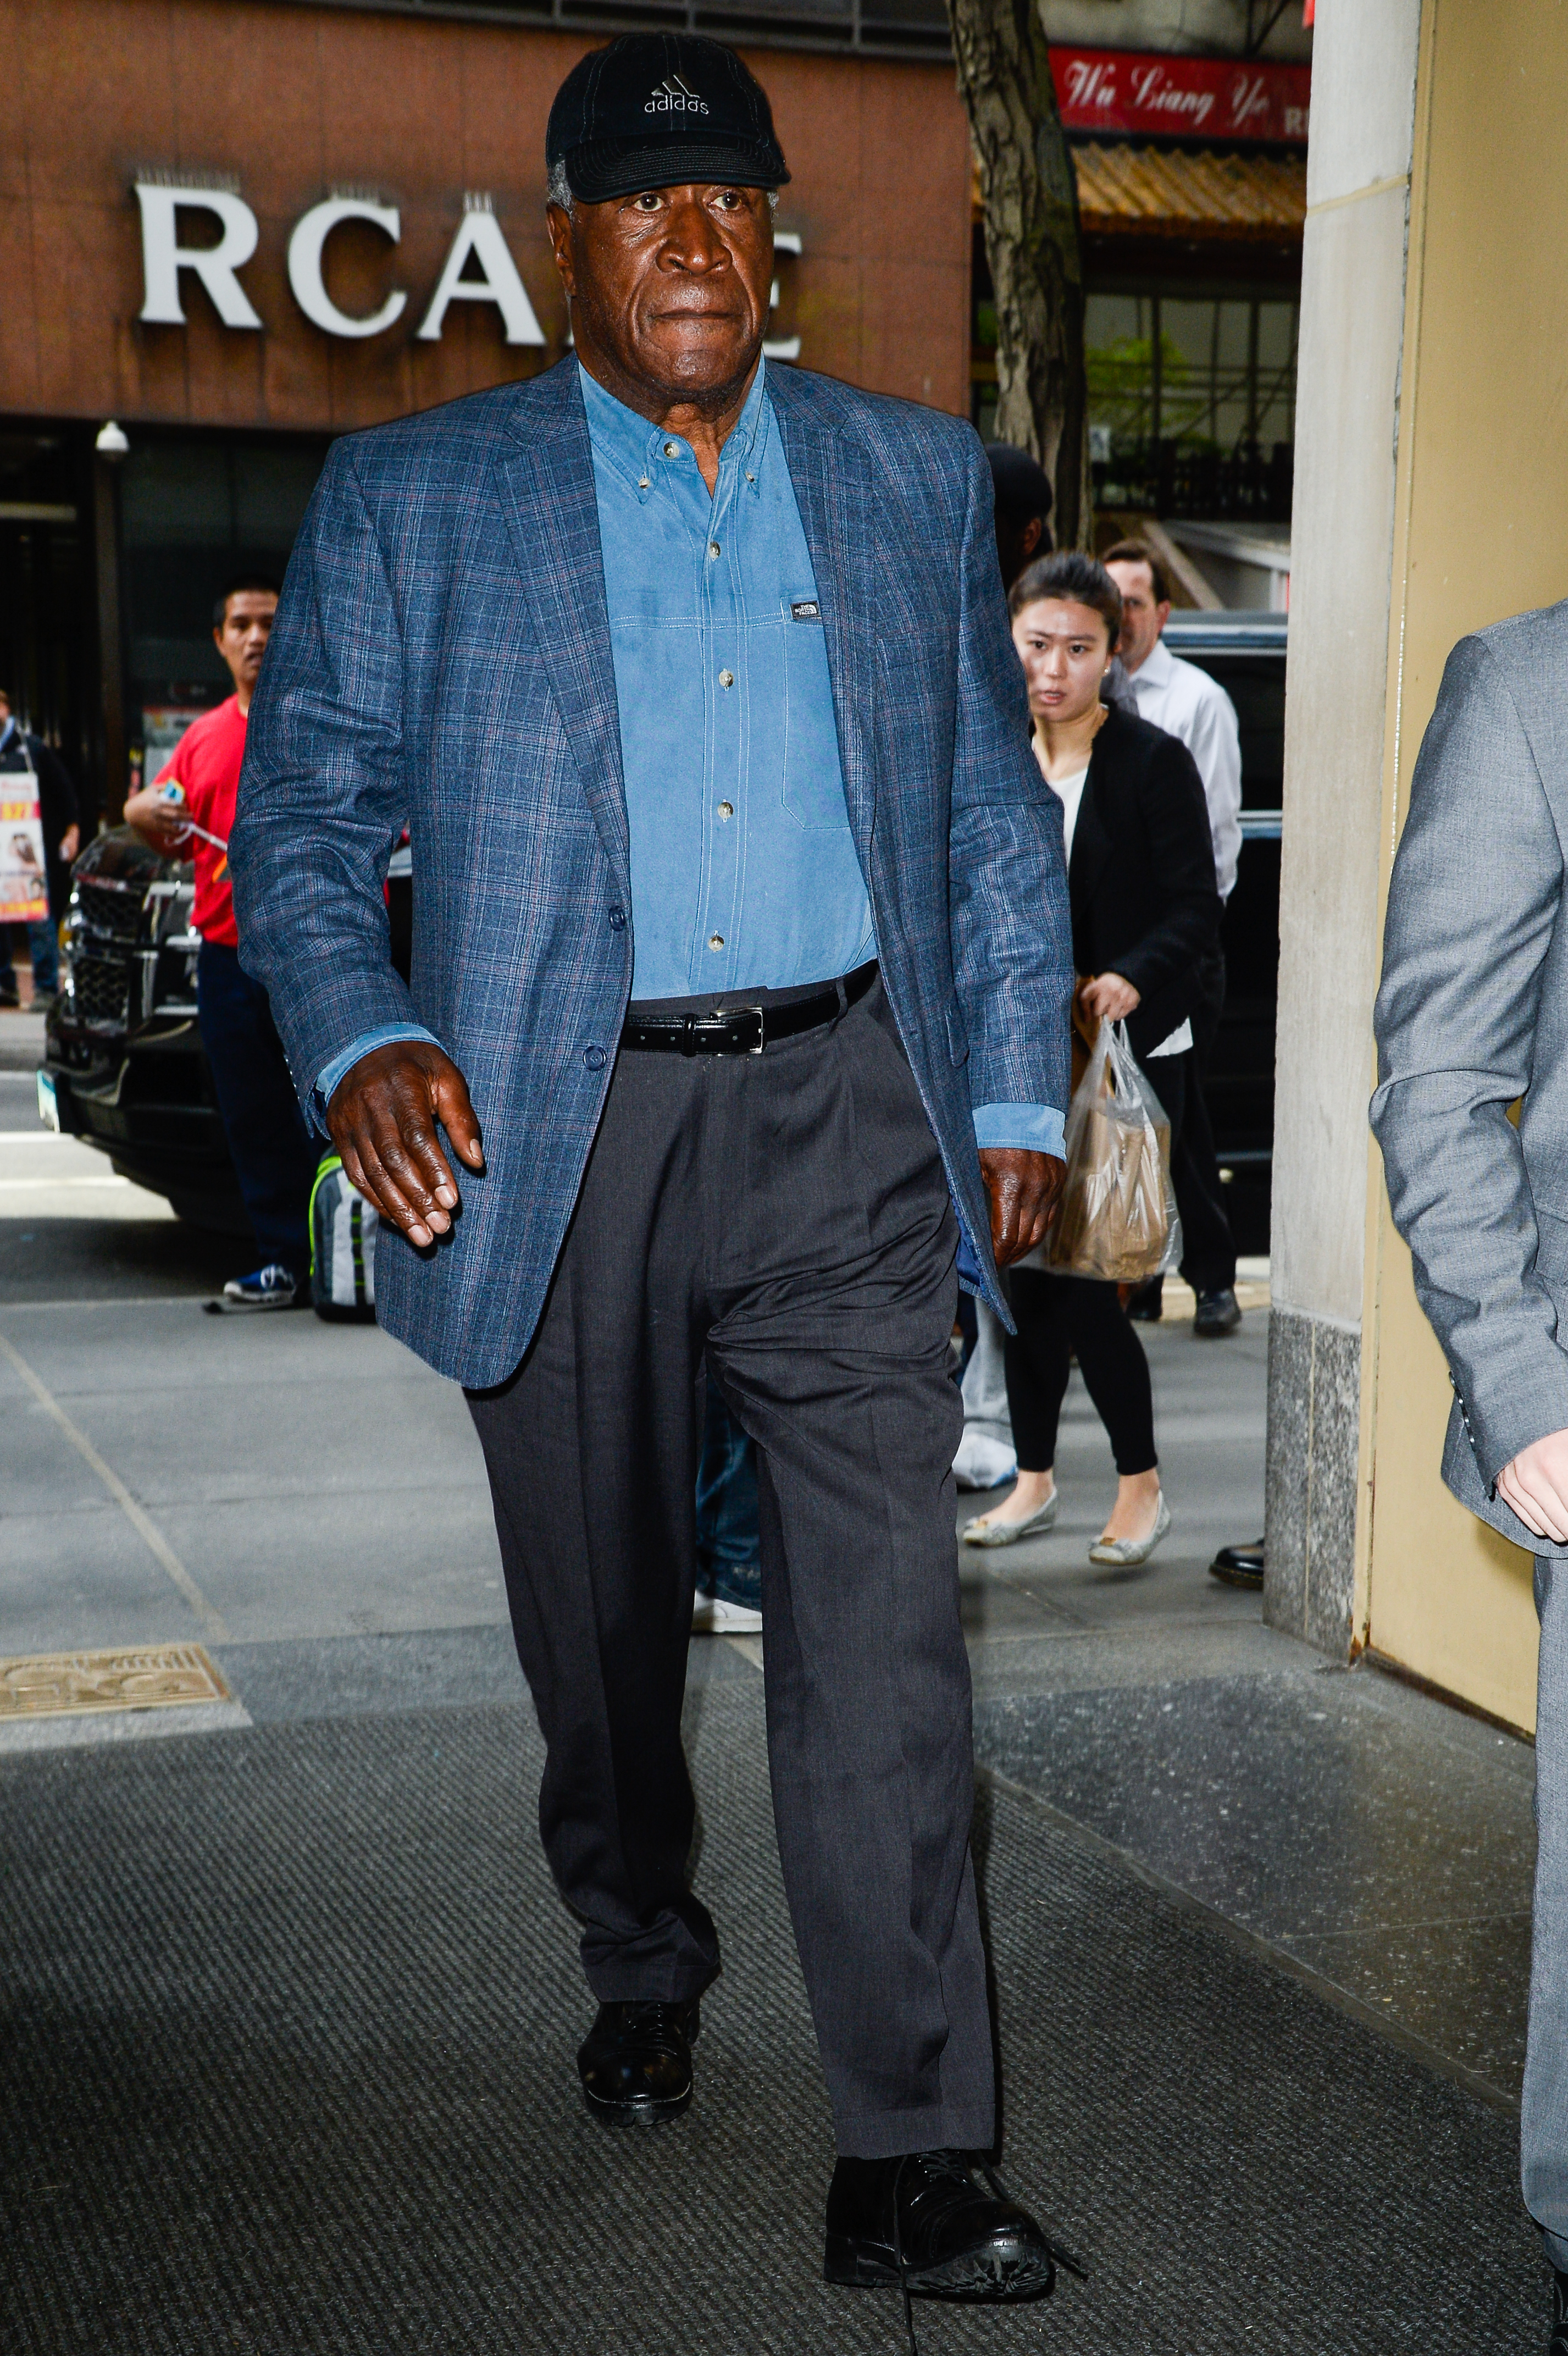 John Amos arriving for a "Today Show" taping on May 11, 2016, in New York City | Source: Getty Images